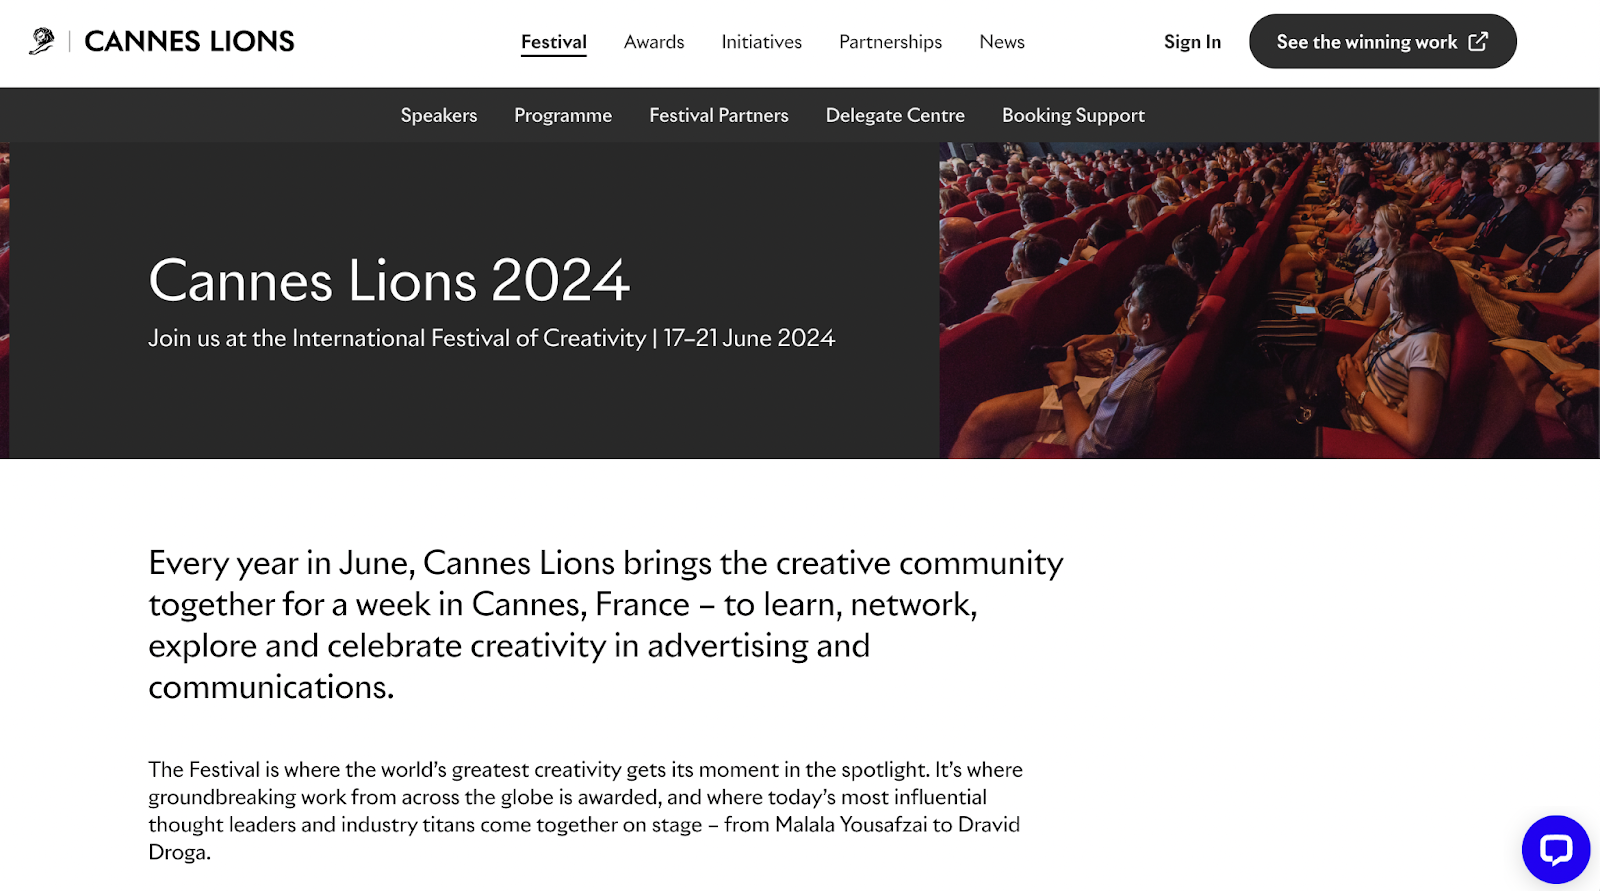 event website examples, cannes lions